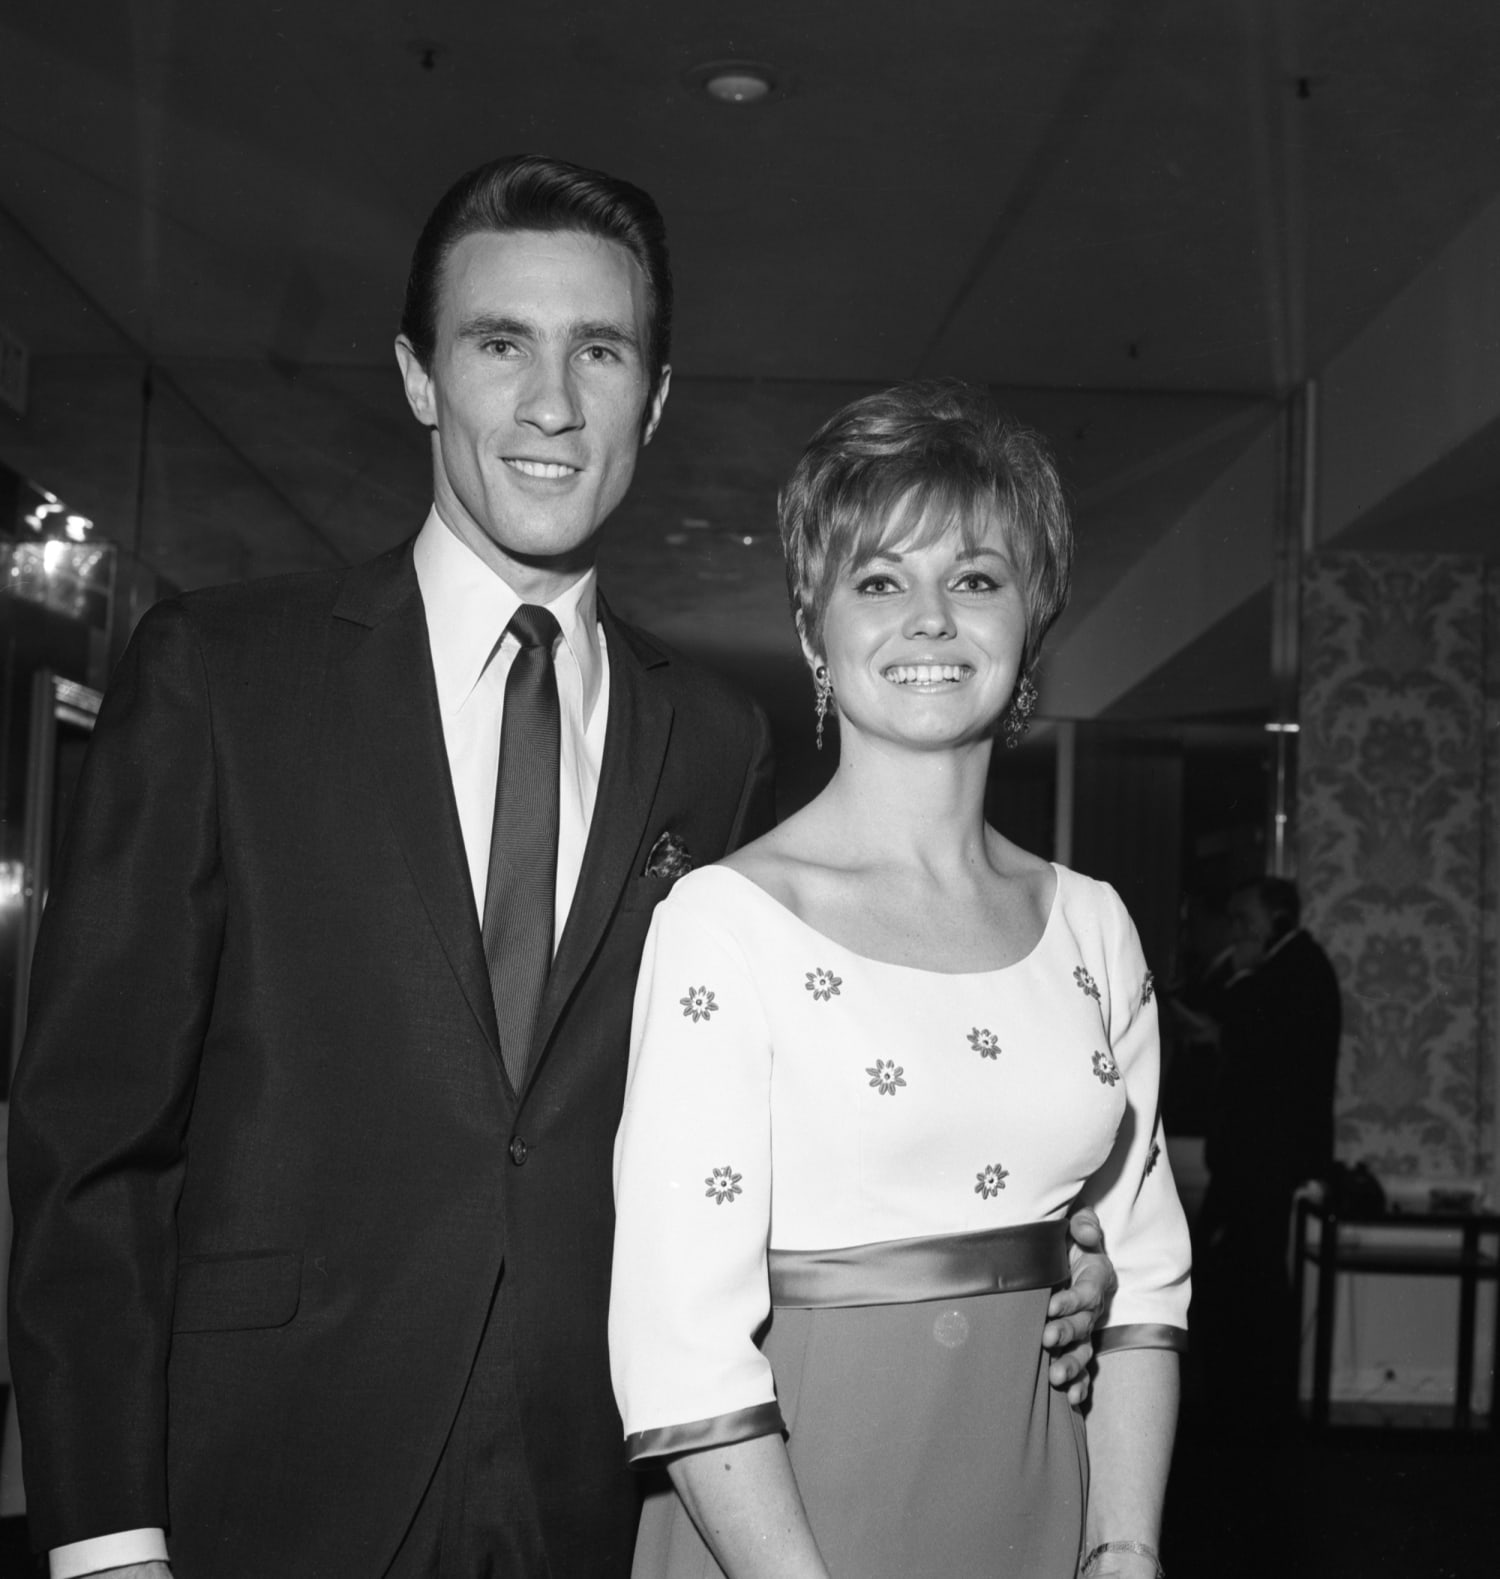 Murder of Righteous Brothers Singers Ex-Wife Karen Klaas Solved 40 Years Later picture